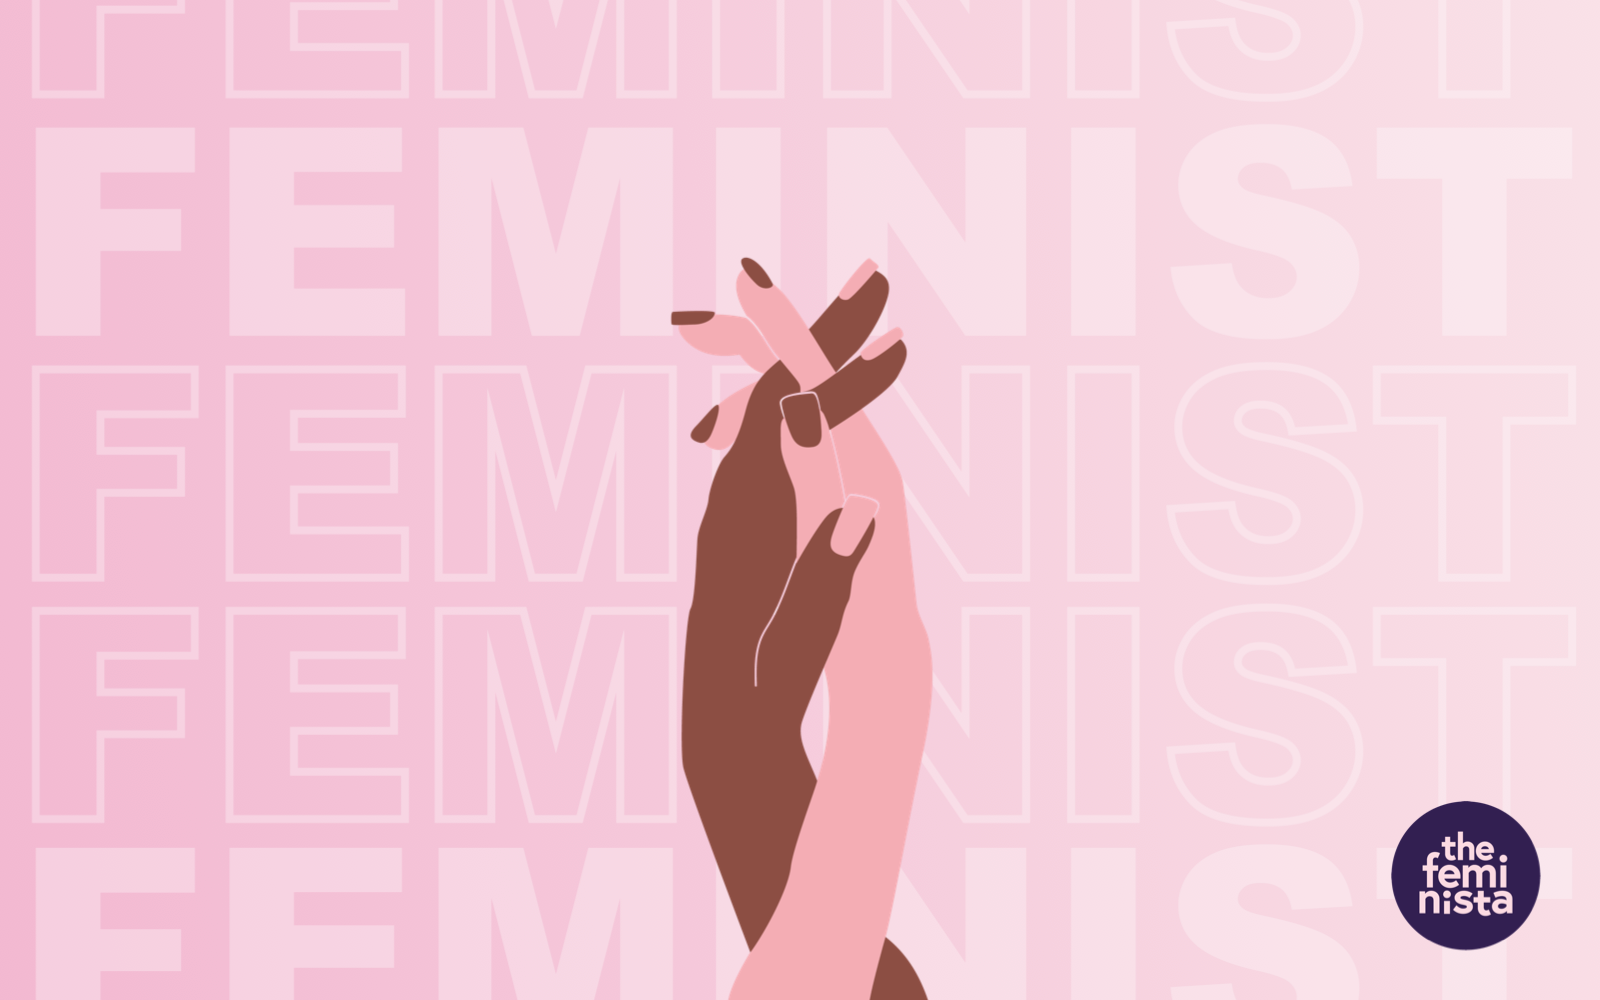 Two hands clasped together on pink background with the word feminist and The Feminista logo